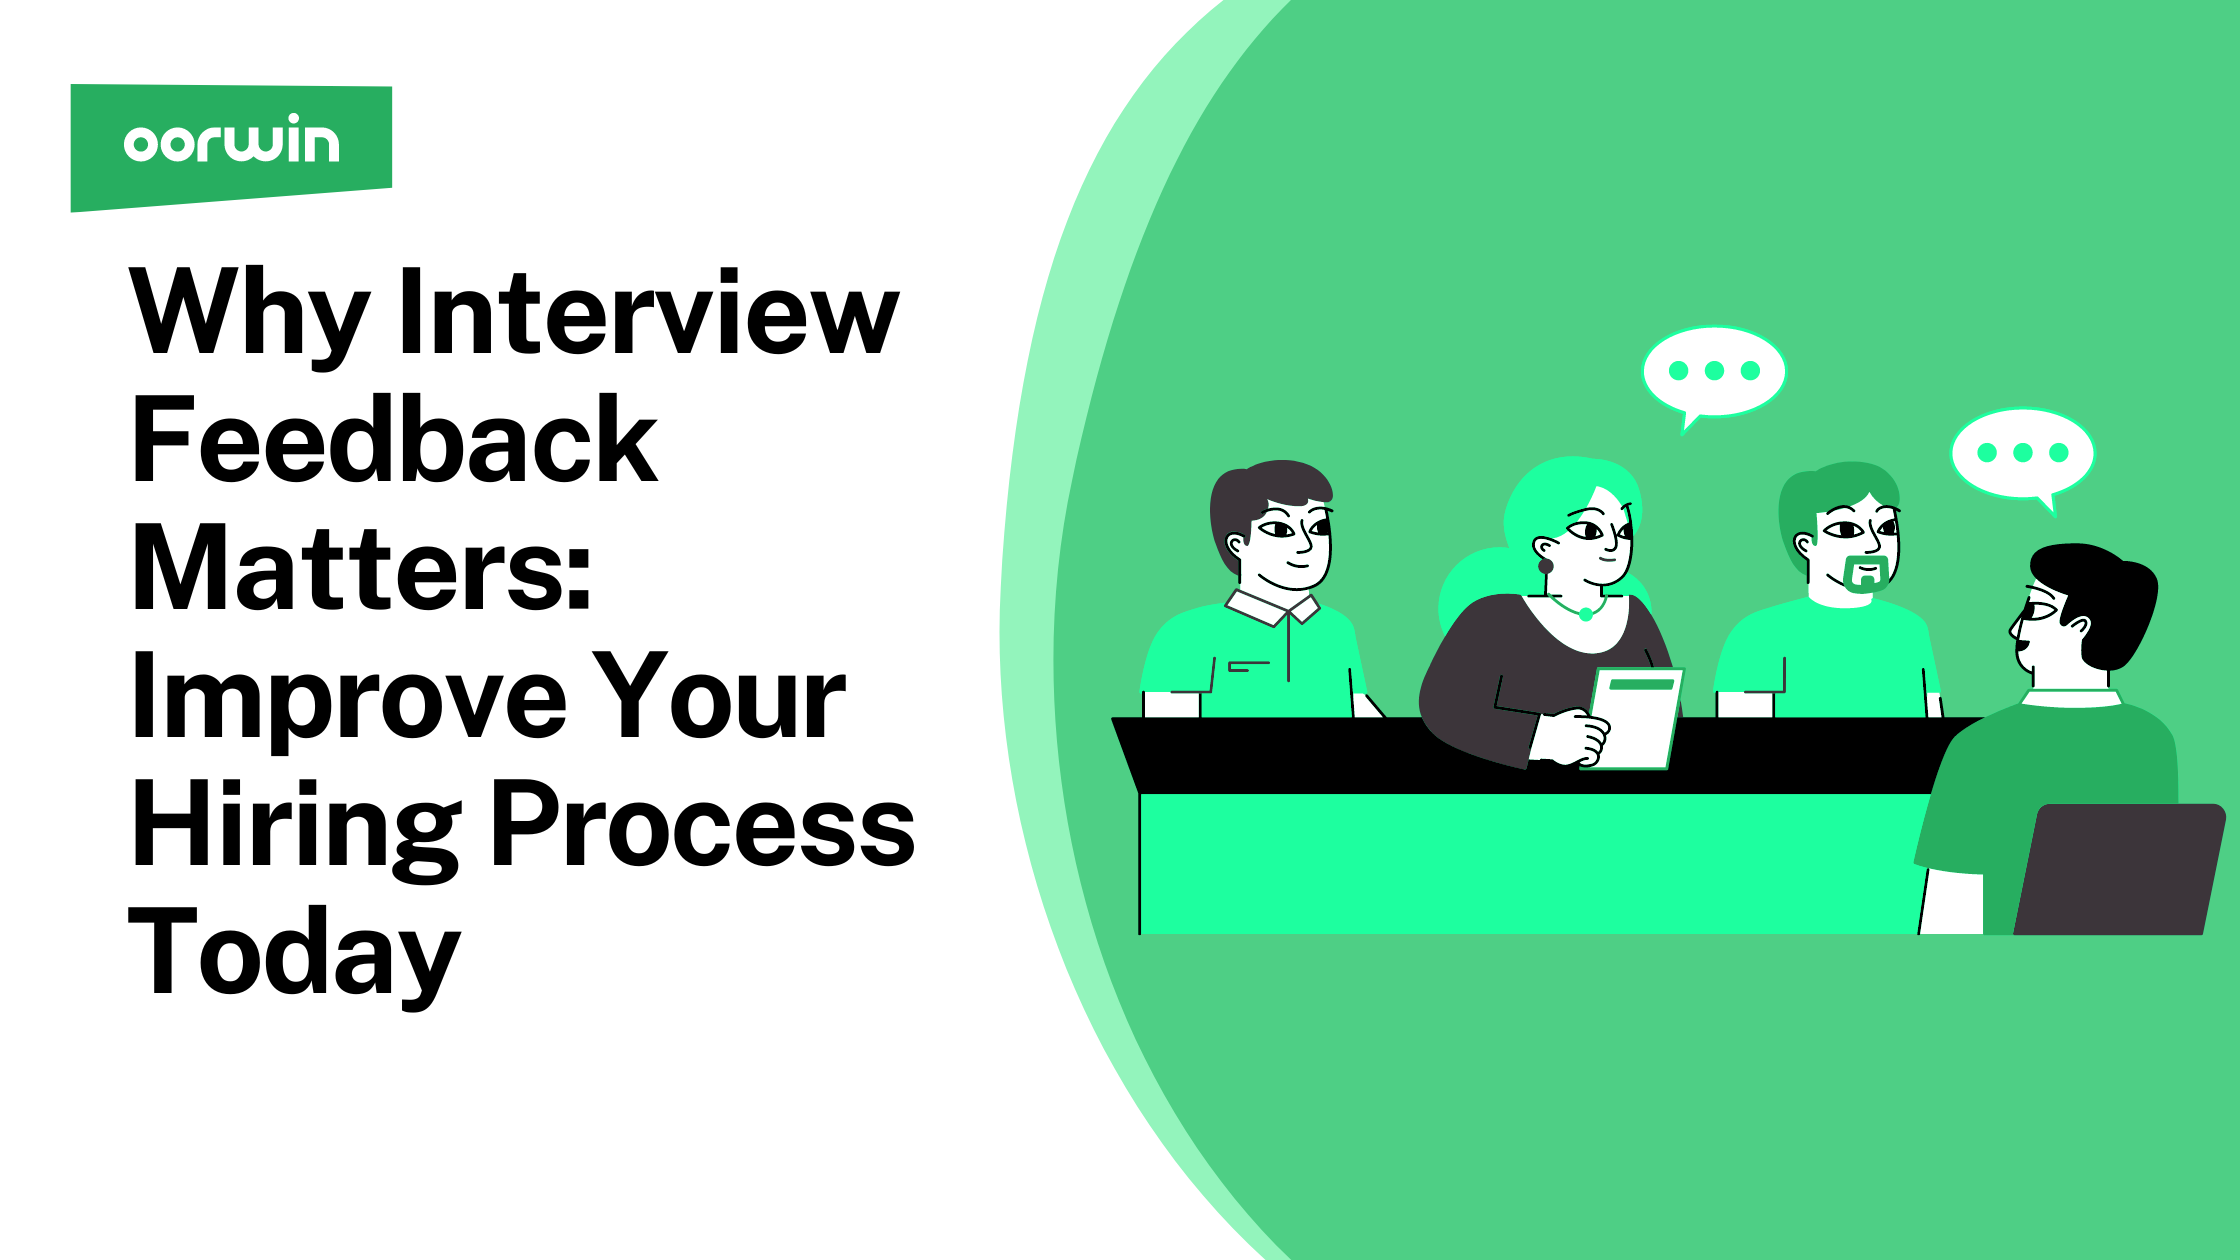 Why Interview Feedback Matters: Improve Your Hiring Process Today